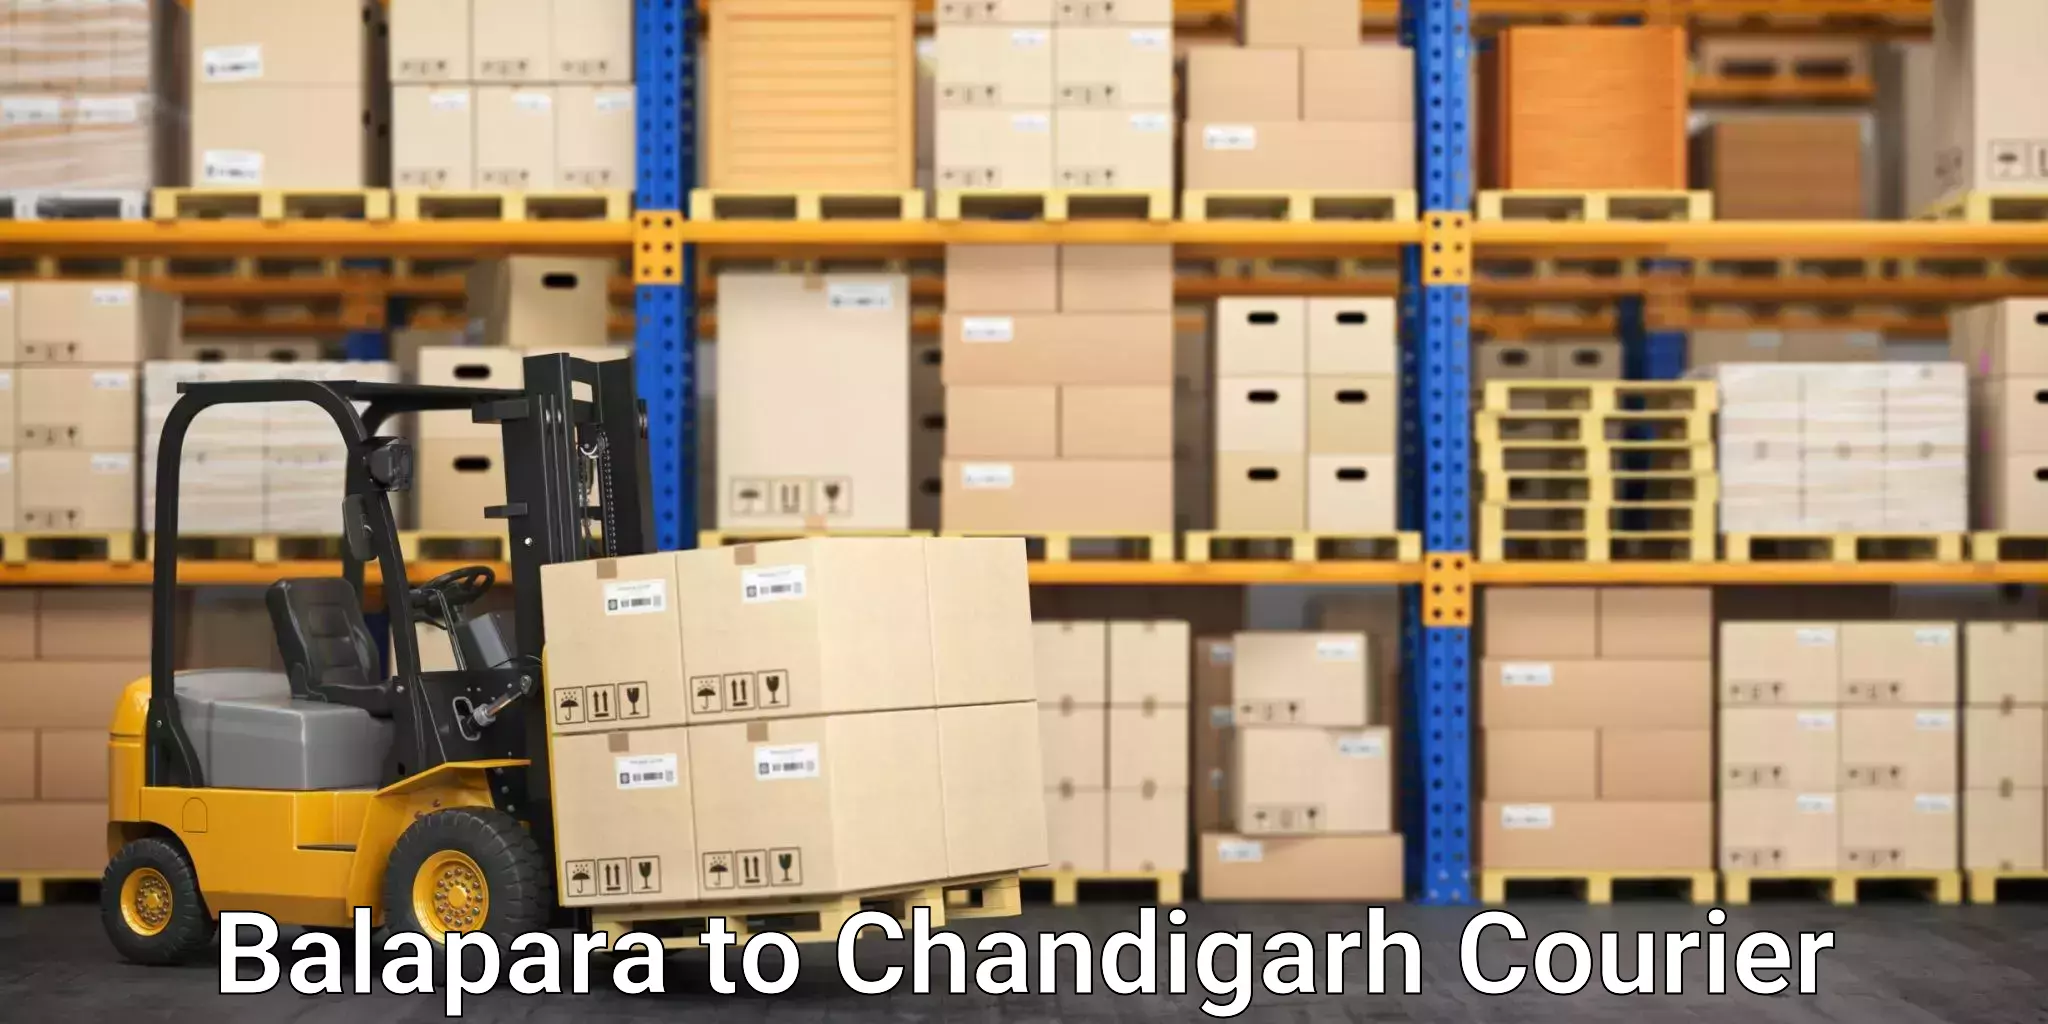 Flexible delivery schedules Balapara to Chandigarh